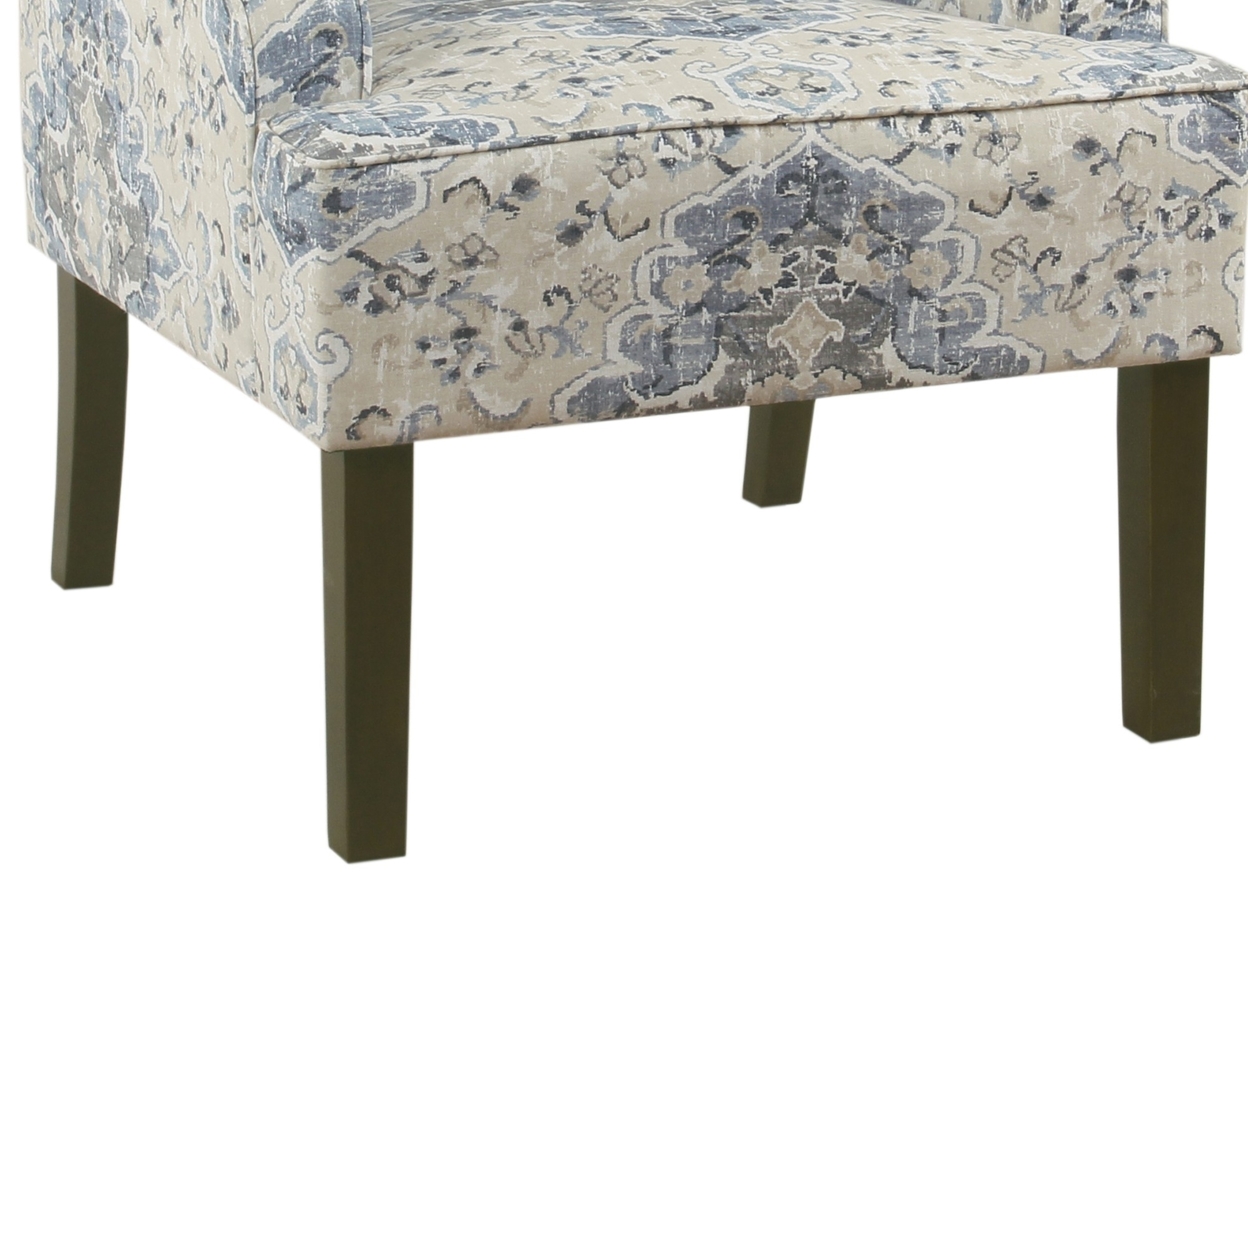 Fabric Upholstered Wooden Accent Chair With Swooping Armrests, Blue, Cream And Brown- Saltoro Sherpi